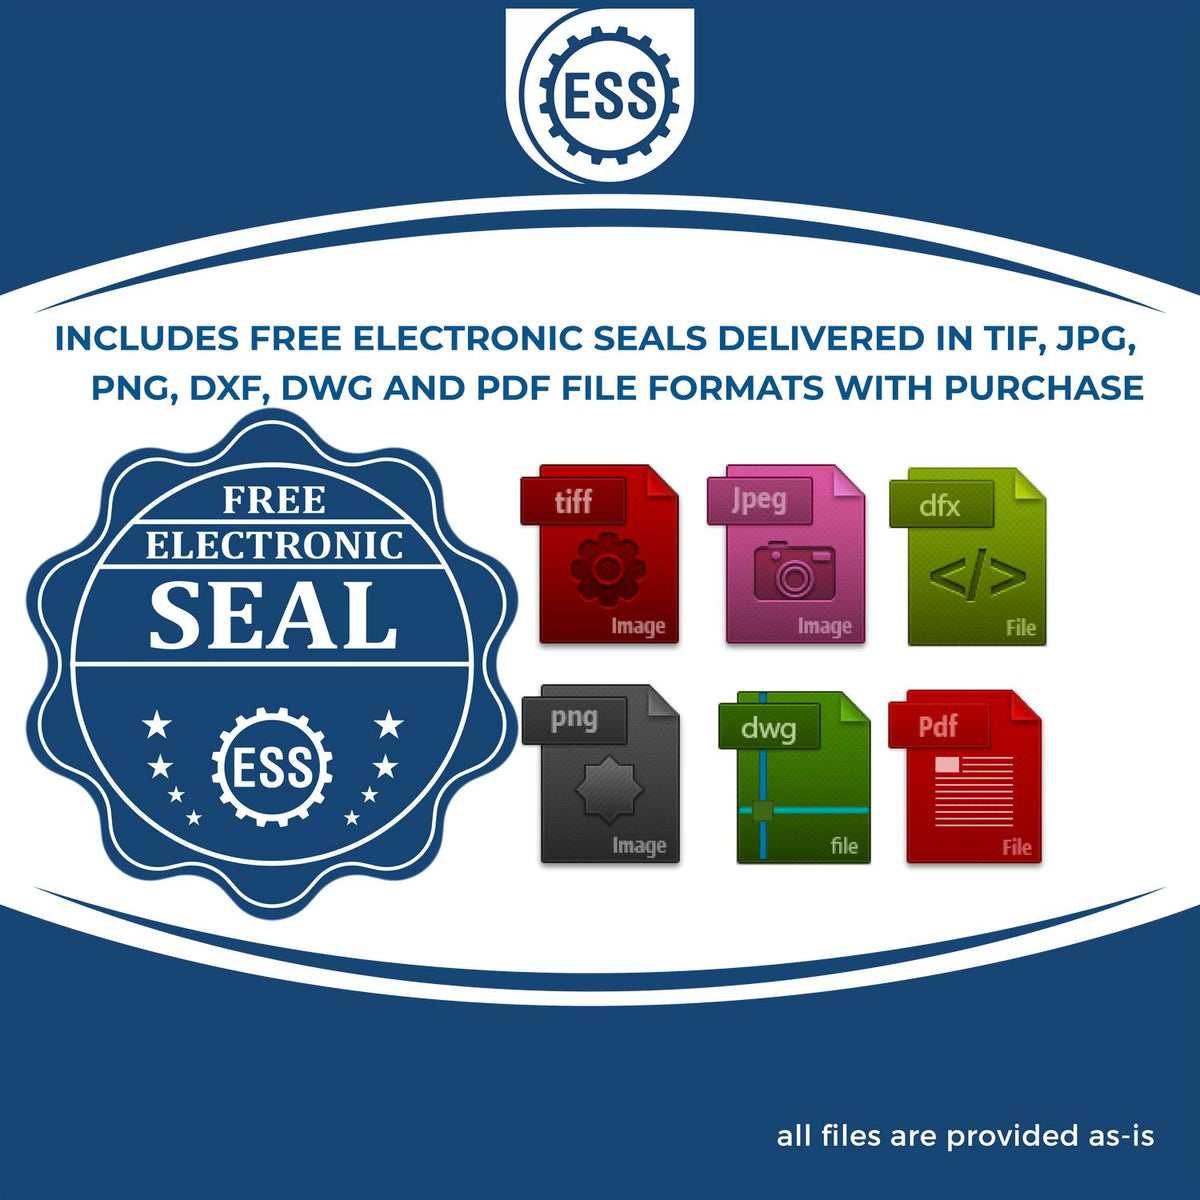 An infographic for the free electronic seal for the Self-Inking State Seal New Mexico Notary Stamp illustrating the different file type icons such as DXF, DWG, TIF, JPG and PNG.